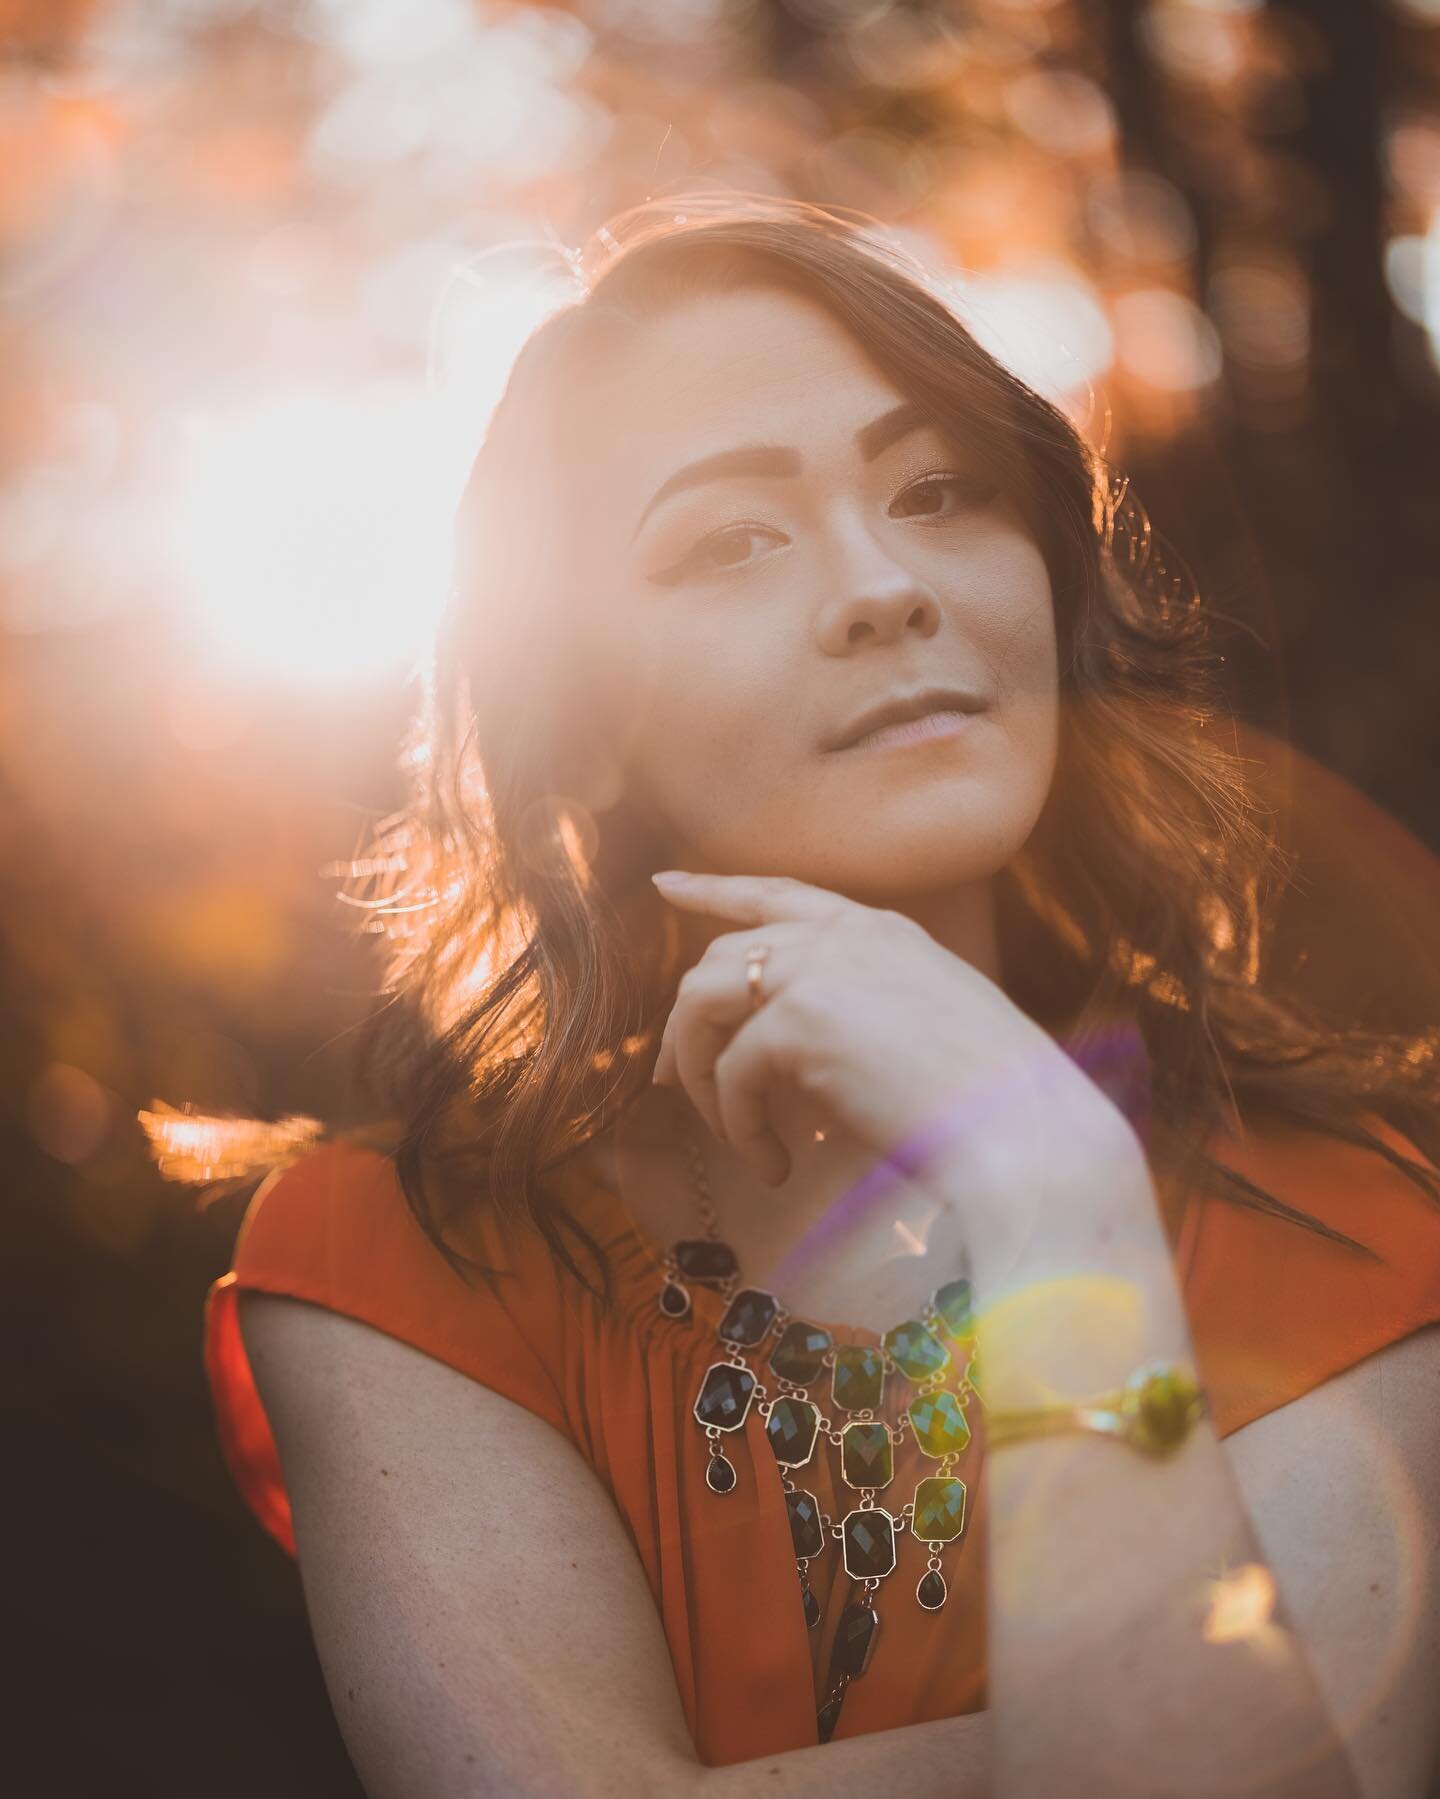 PRO TIP: Sometimes shooting into the sun can be used as a creative advantage 🌄
&bull;
Shot with @canonusa 
EOS R5 w/ 50mm f/1.2 RF Lens 
Shutter 1/400 iso 100 
&bull;
#canonphotography #fallphotoshoot #portraitposes #poses #posesforpictures #phototi